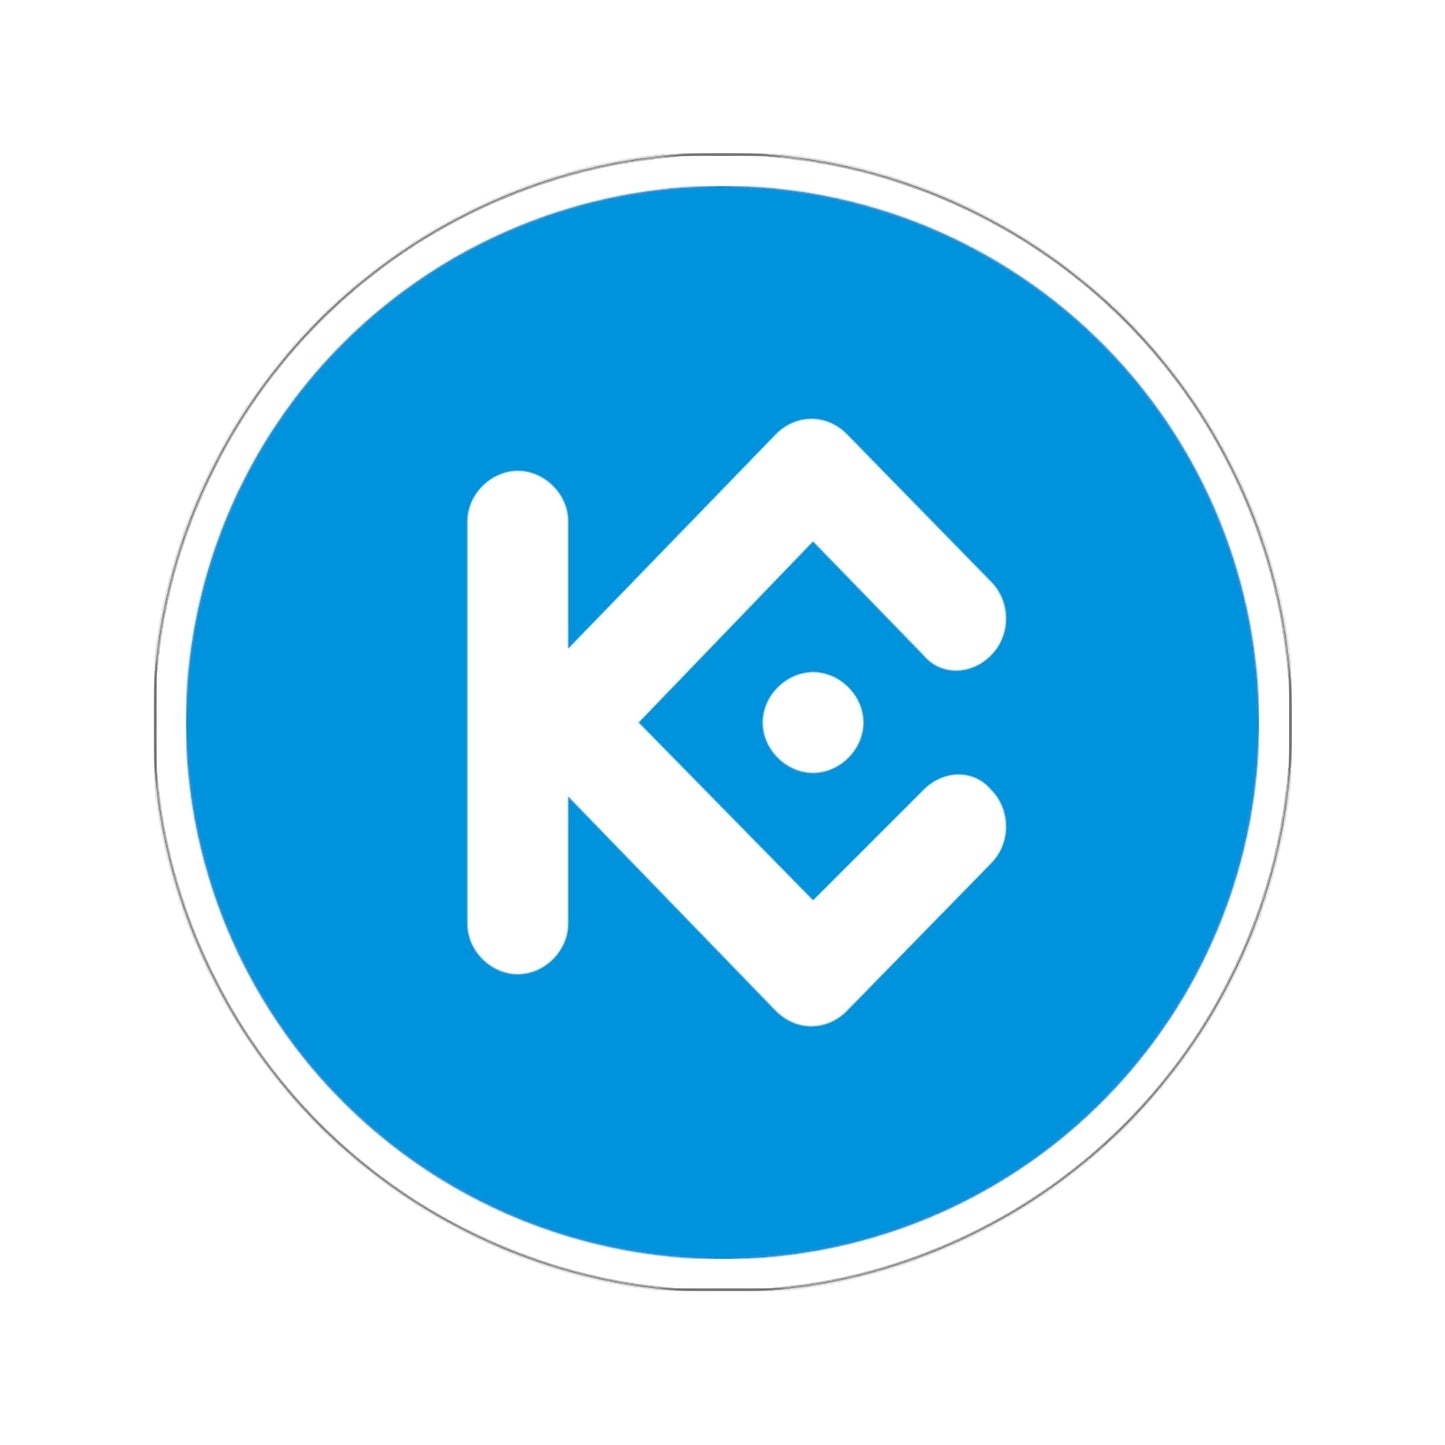 KUCOIN SHARES KCS (Cryptocurrency) STICKER Vinyl Die-Cut Decal-4 Inch-The Sticker Space